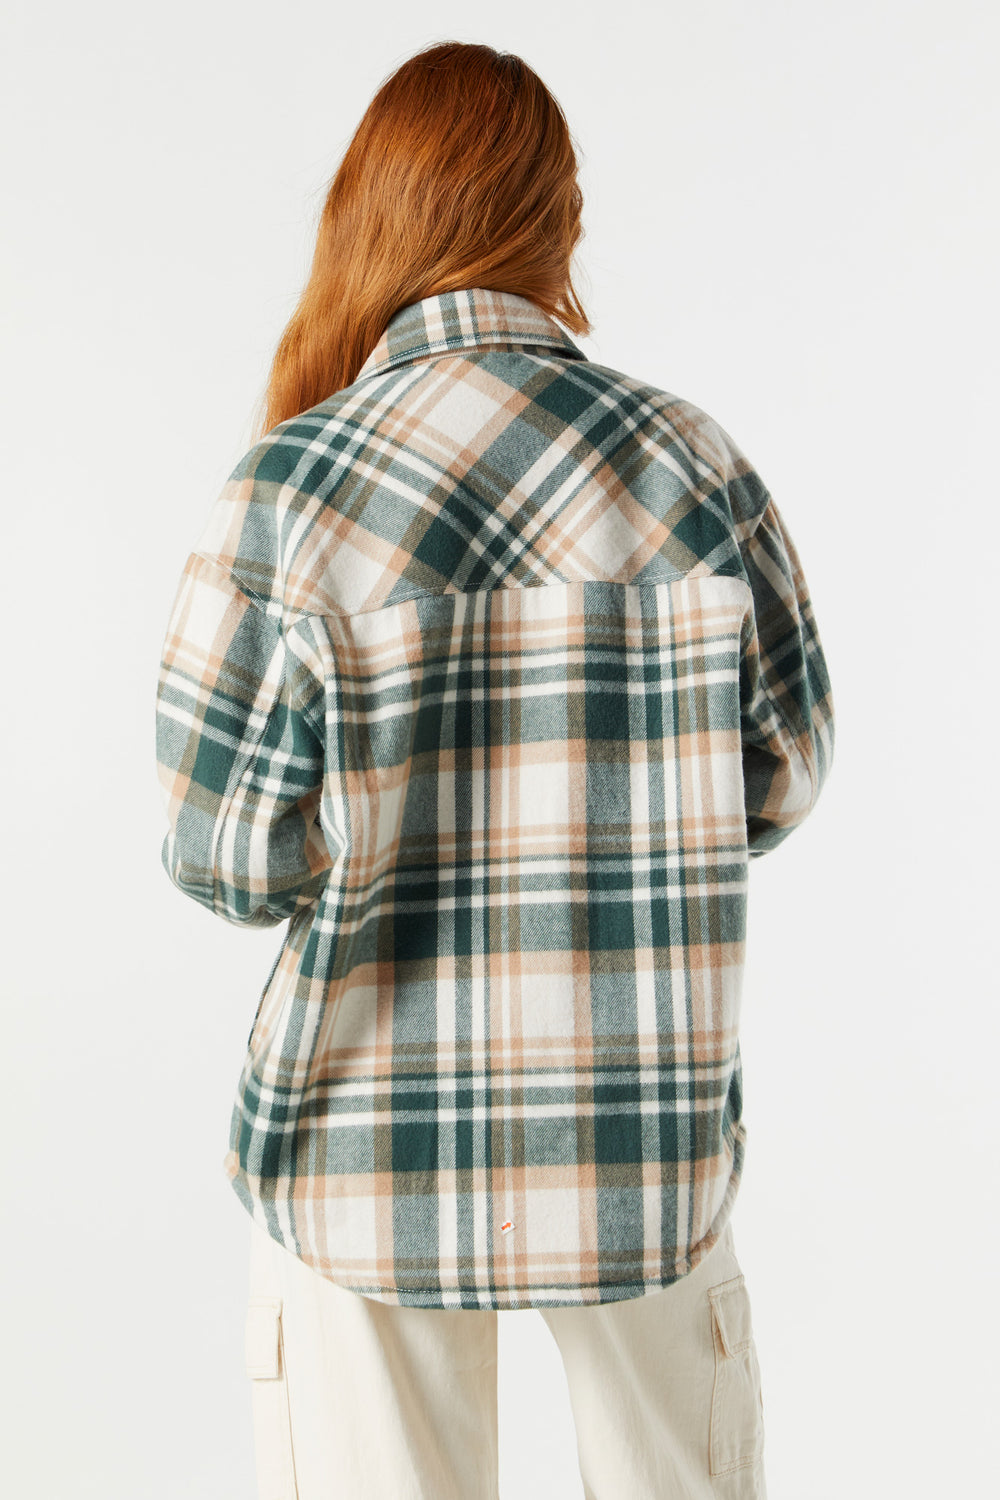 Grey and Blue Plaid Sherpa Flannel Grey and Blue Plaid Sherpa Flannel 73